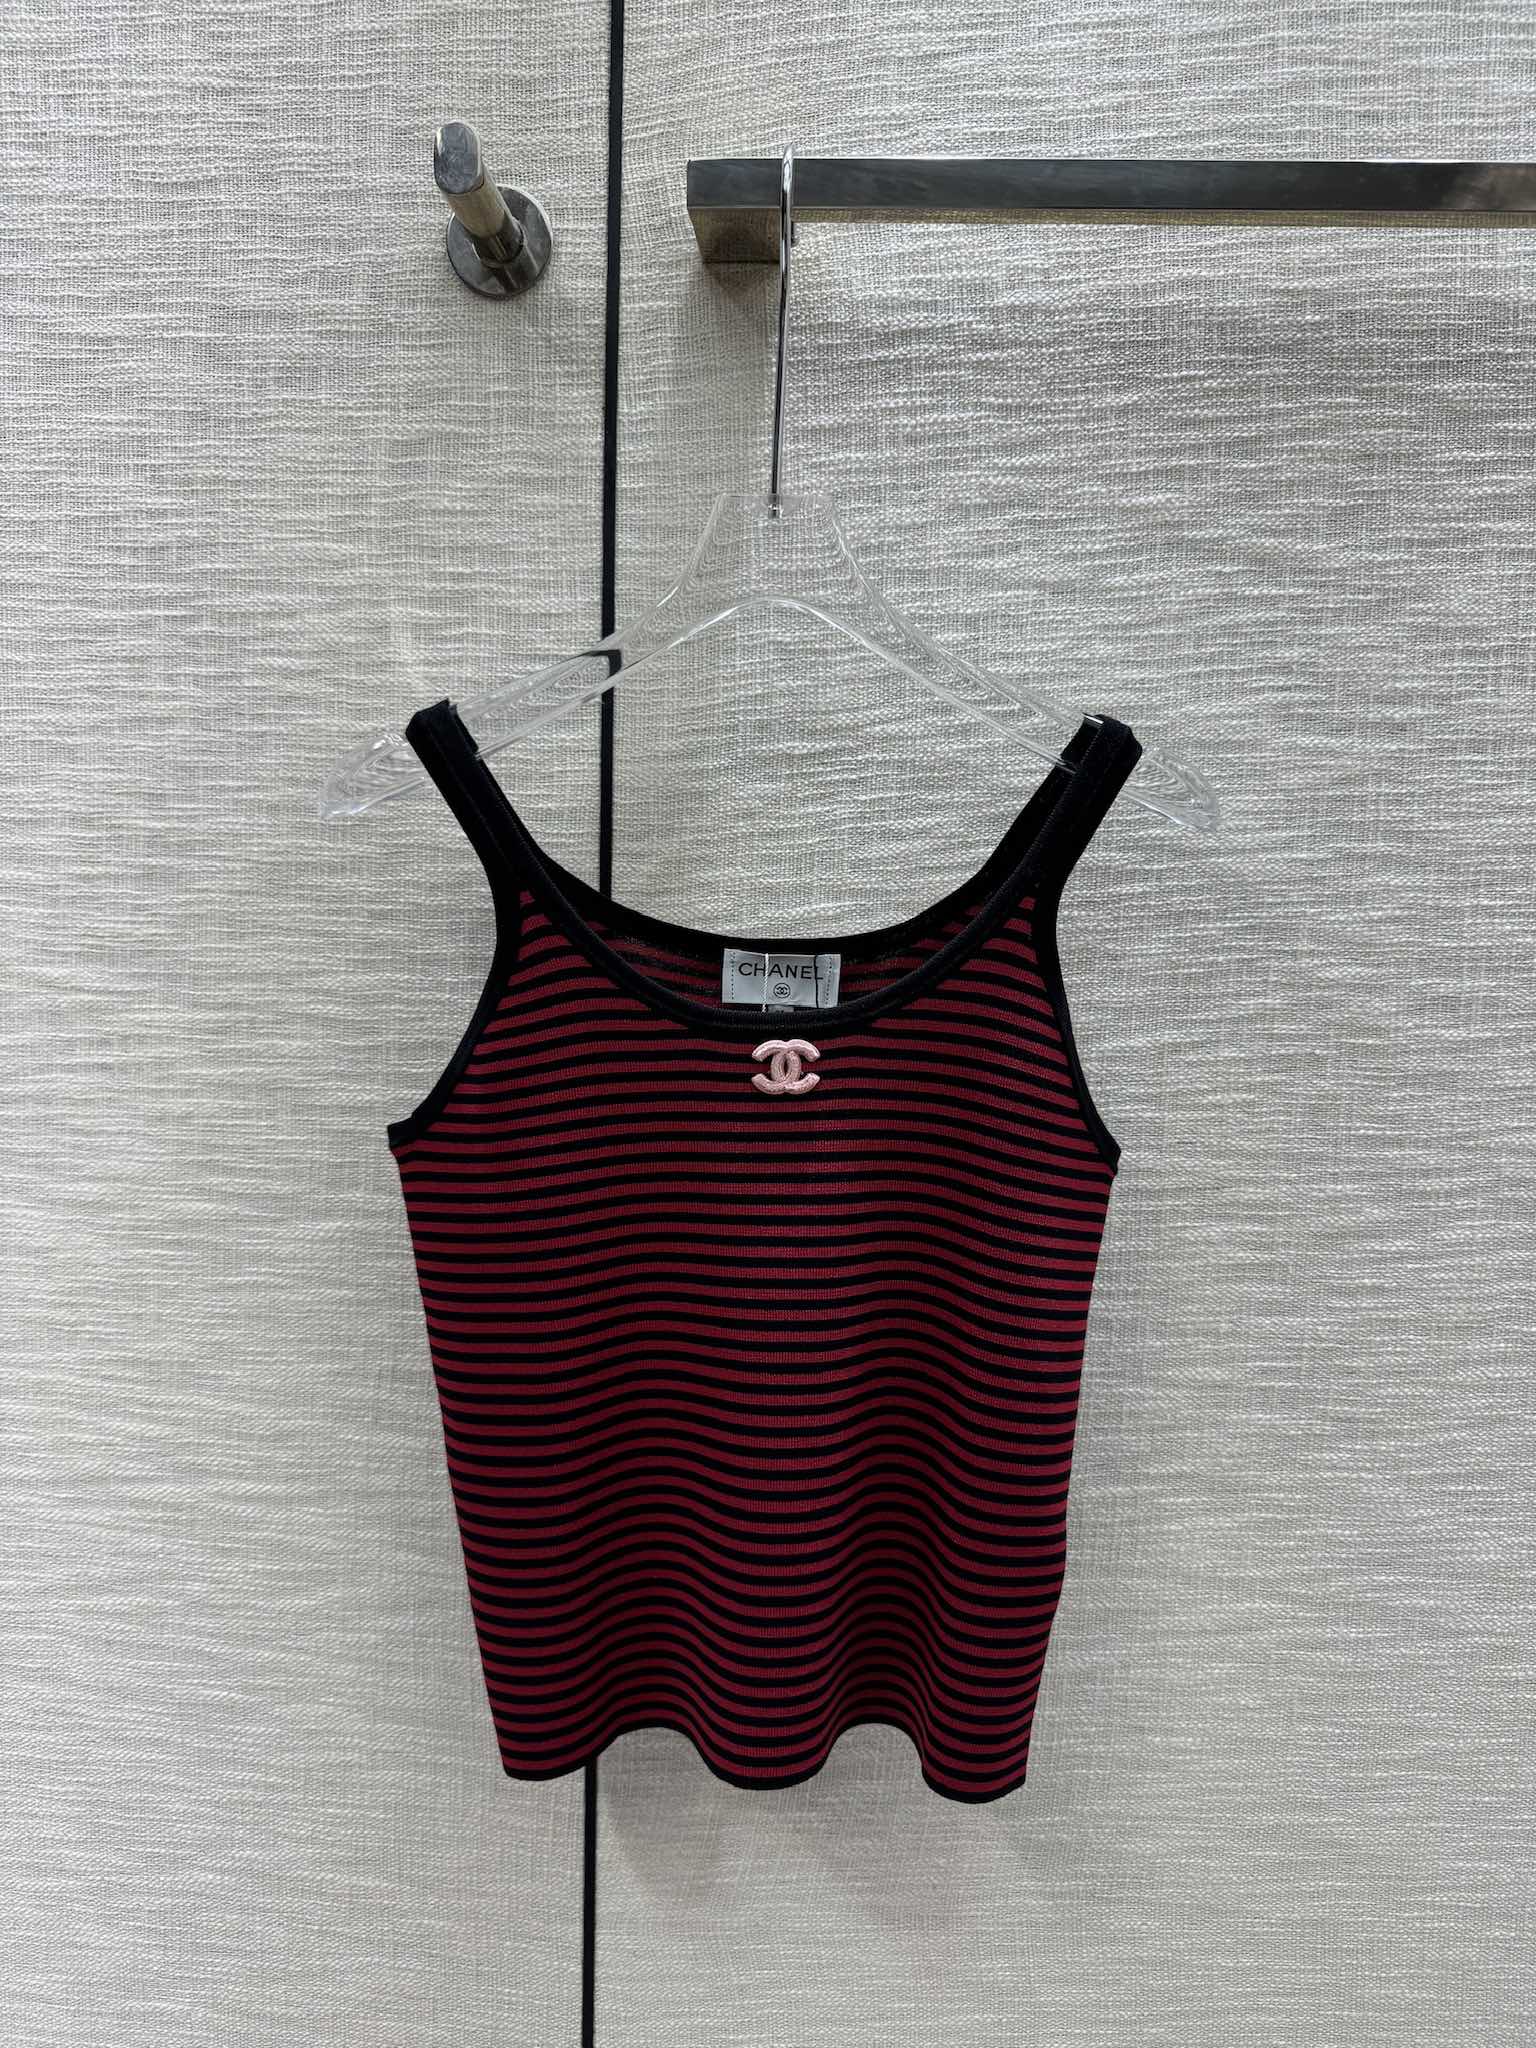 website to buy replica
 Chanel Clothing Tank Tops&Camis Knitting Spring Collection